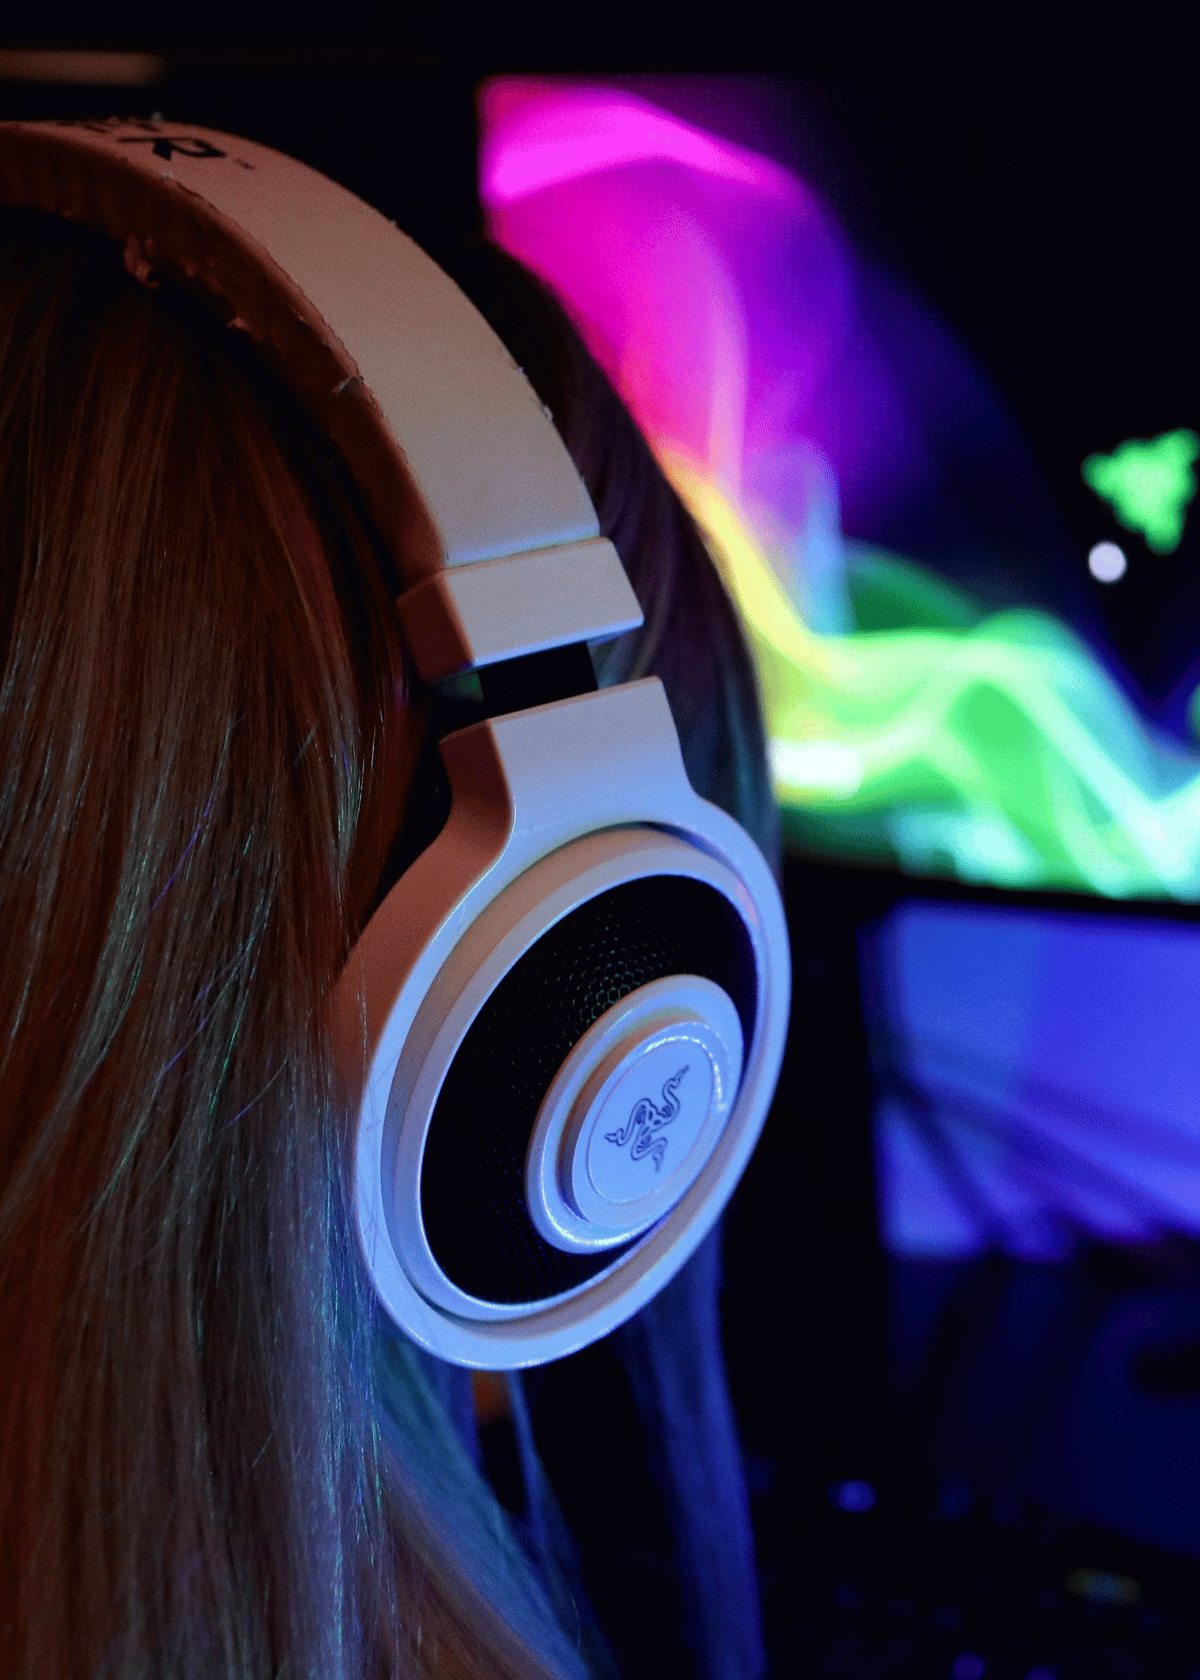 Game on a Budget 2023: The Best Gaming Headset Under $100